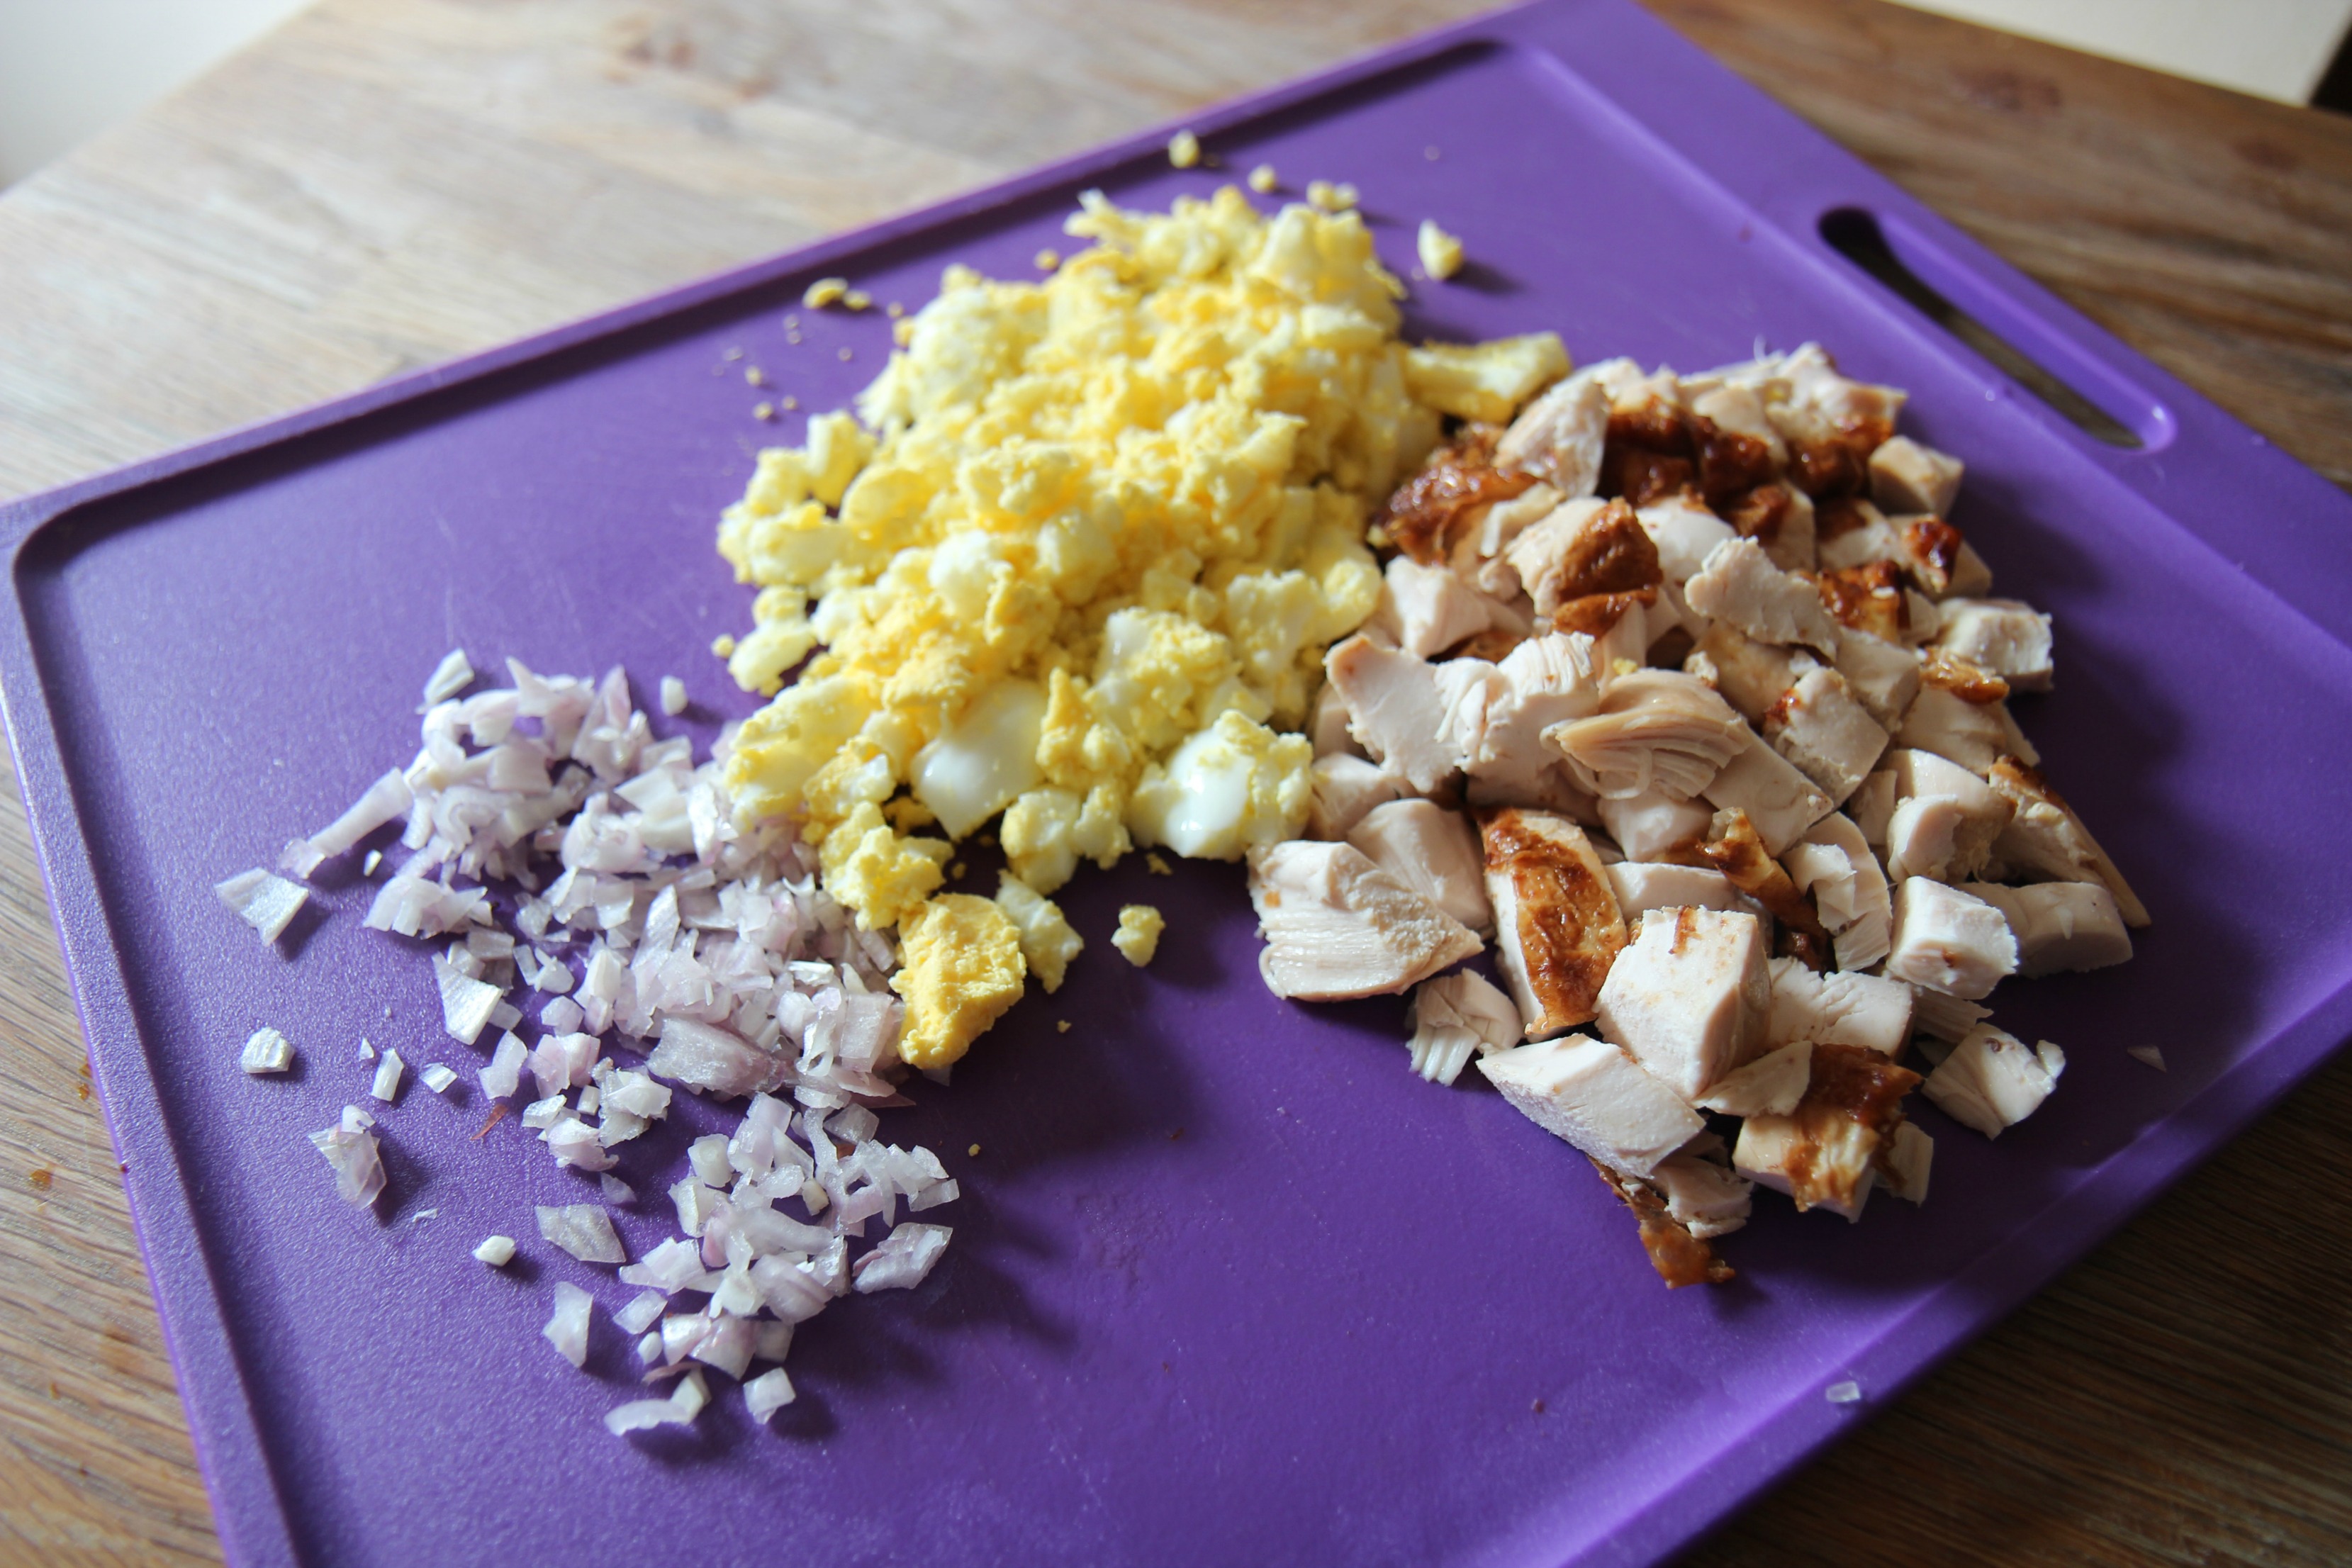 Onions, Eggs, and Chicken for the salad